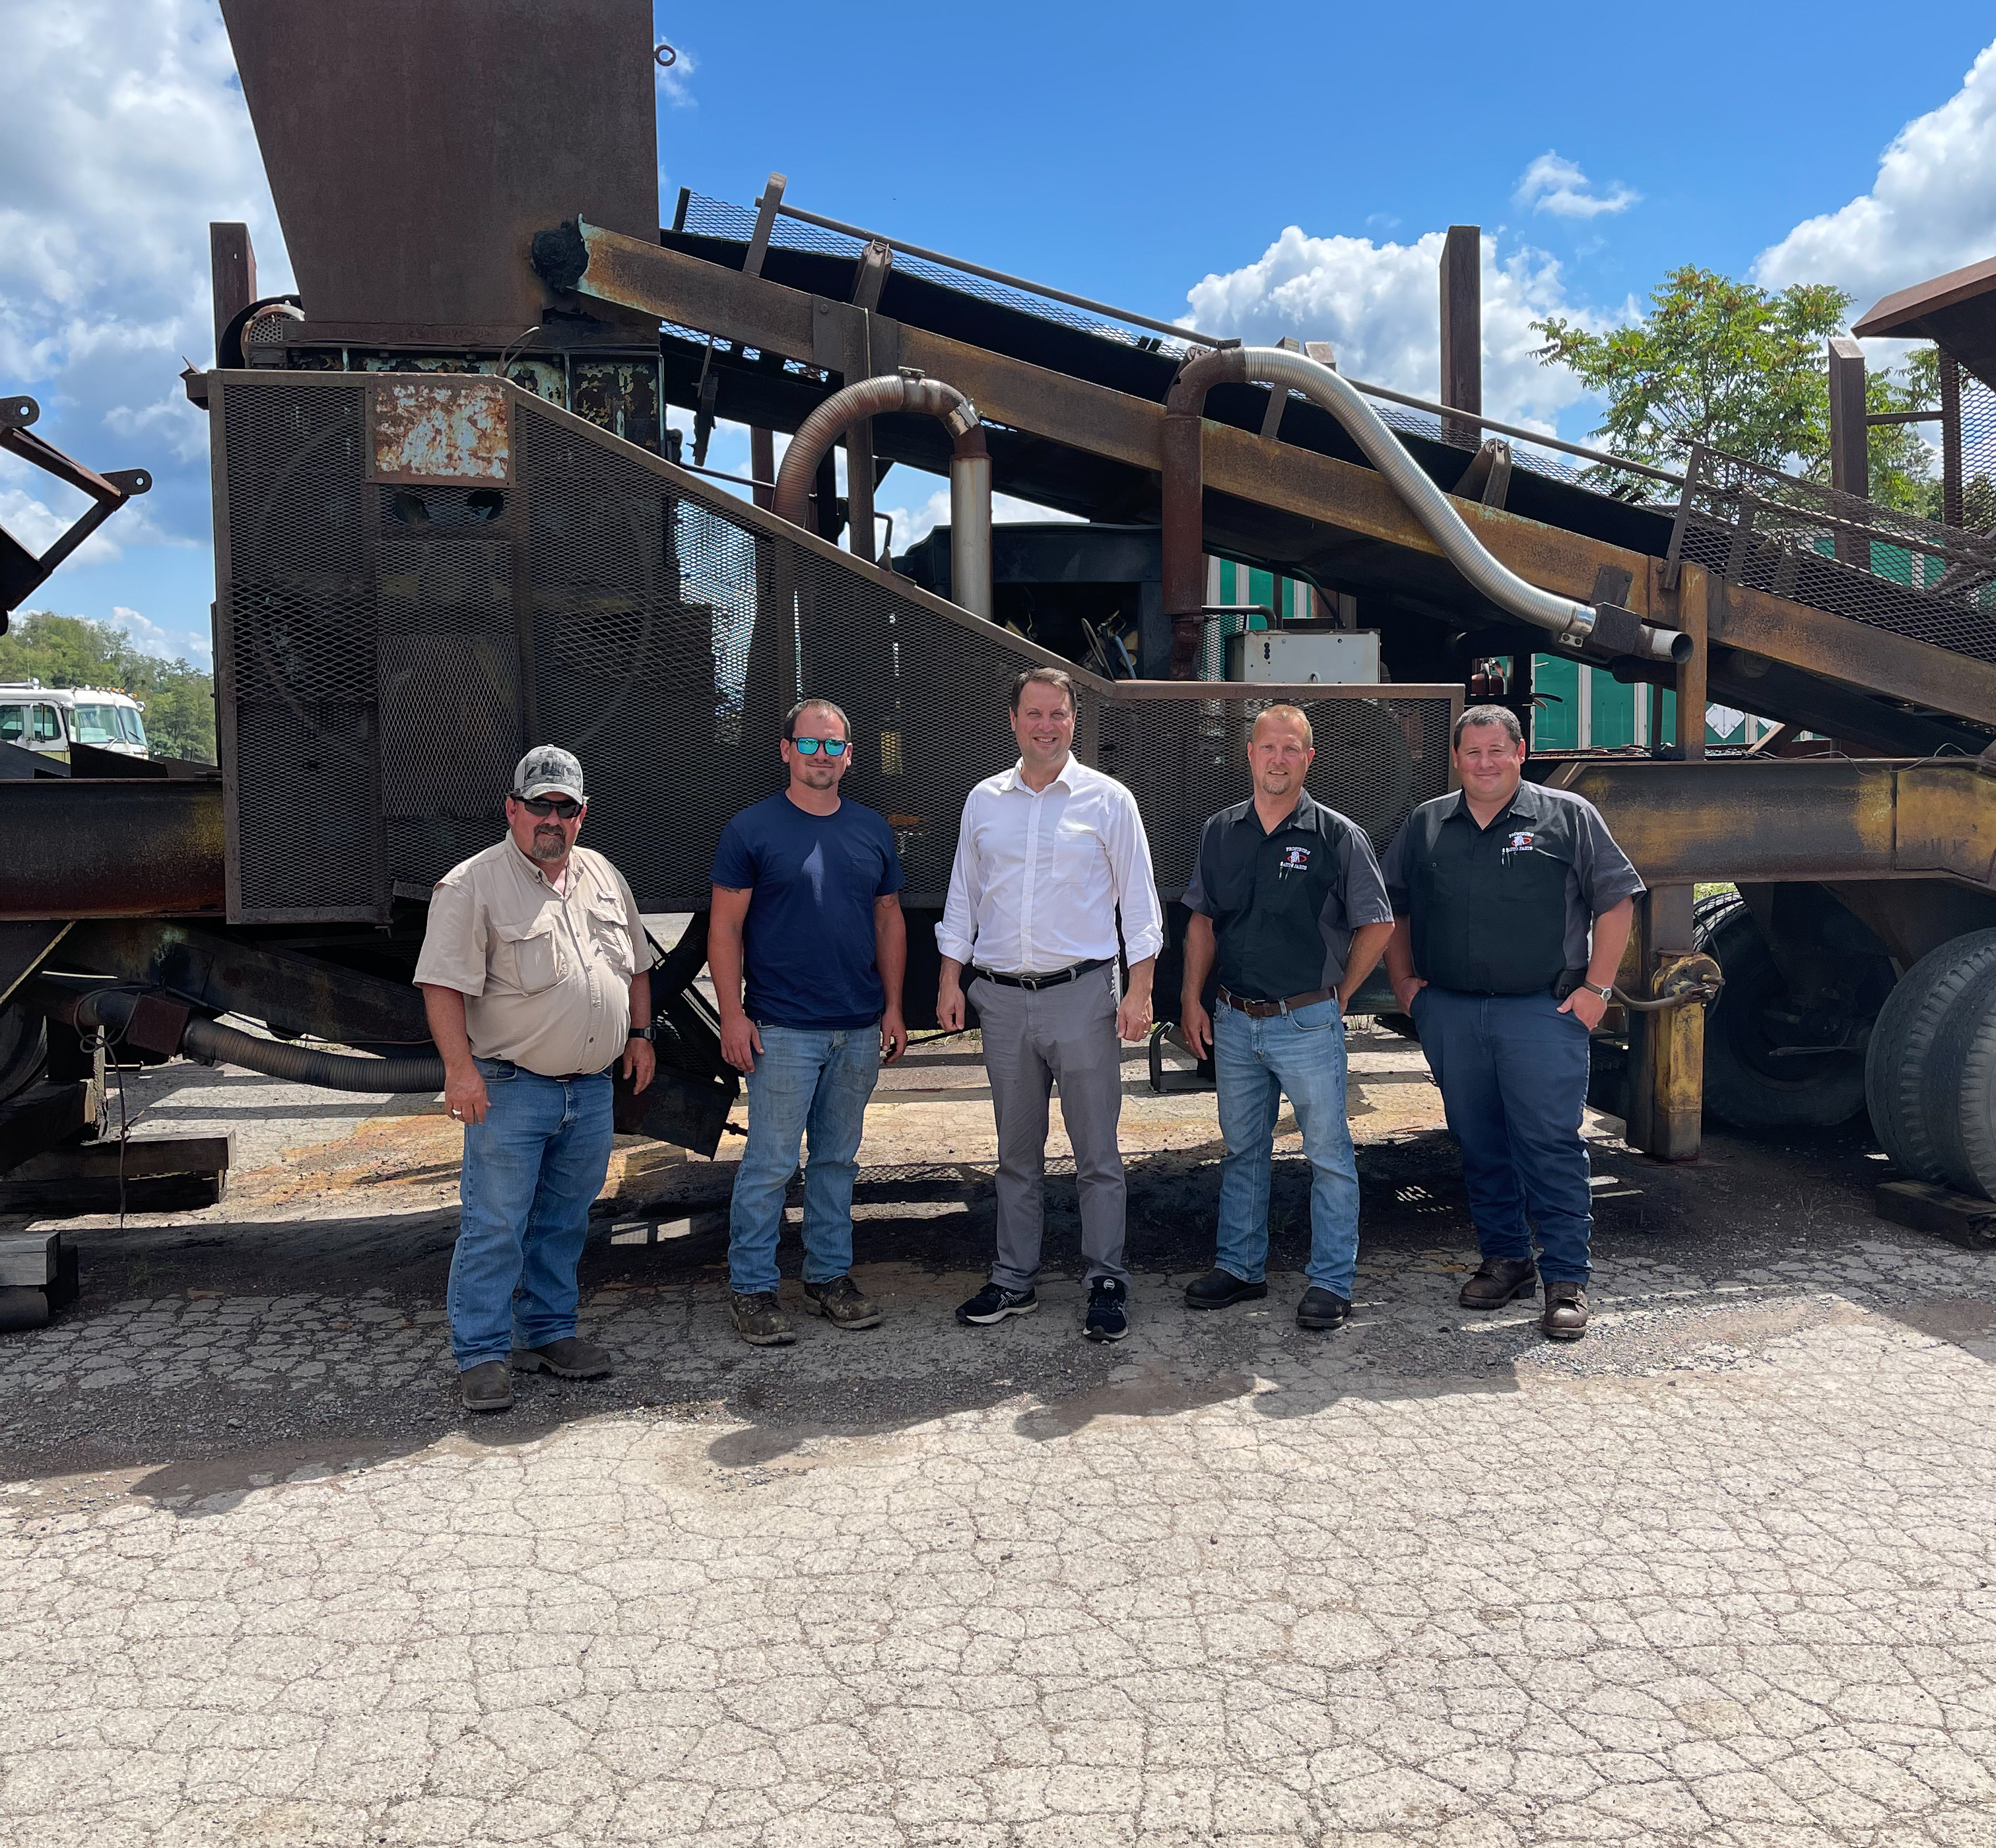 Republican gubernatorial nominee Dan Cox poses for a group photo at Savage Mountain Minerals Inc. in Barton, Md. on Sept. 9,2022. (Photo provided by Dan Cox for Governor campaign)